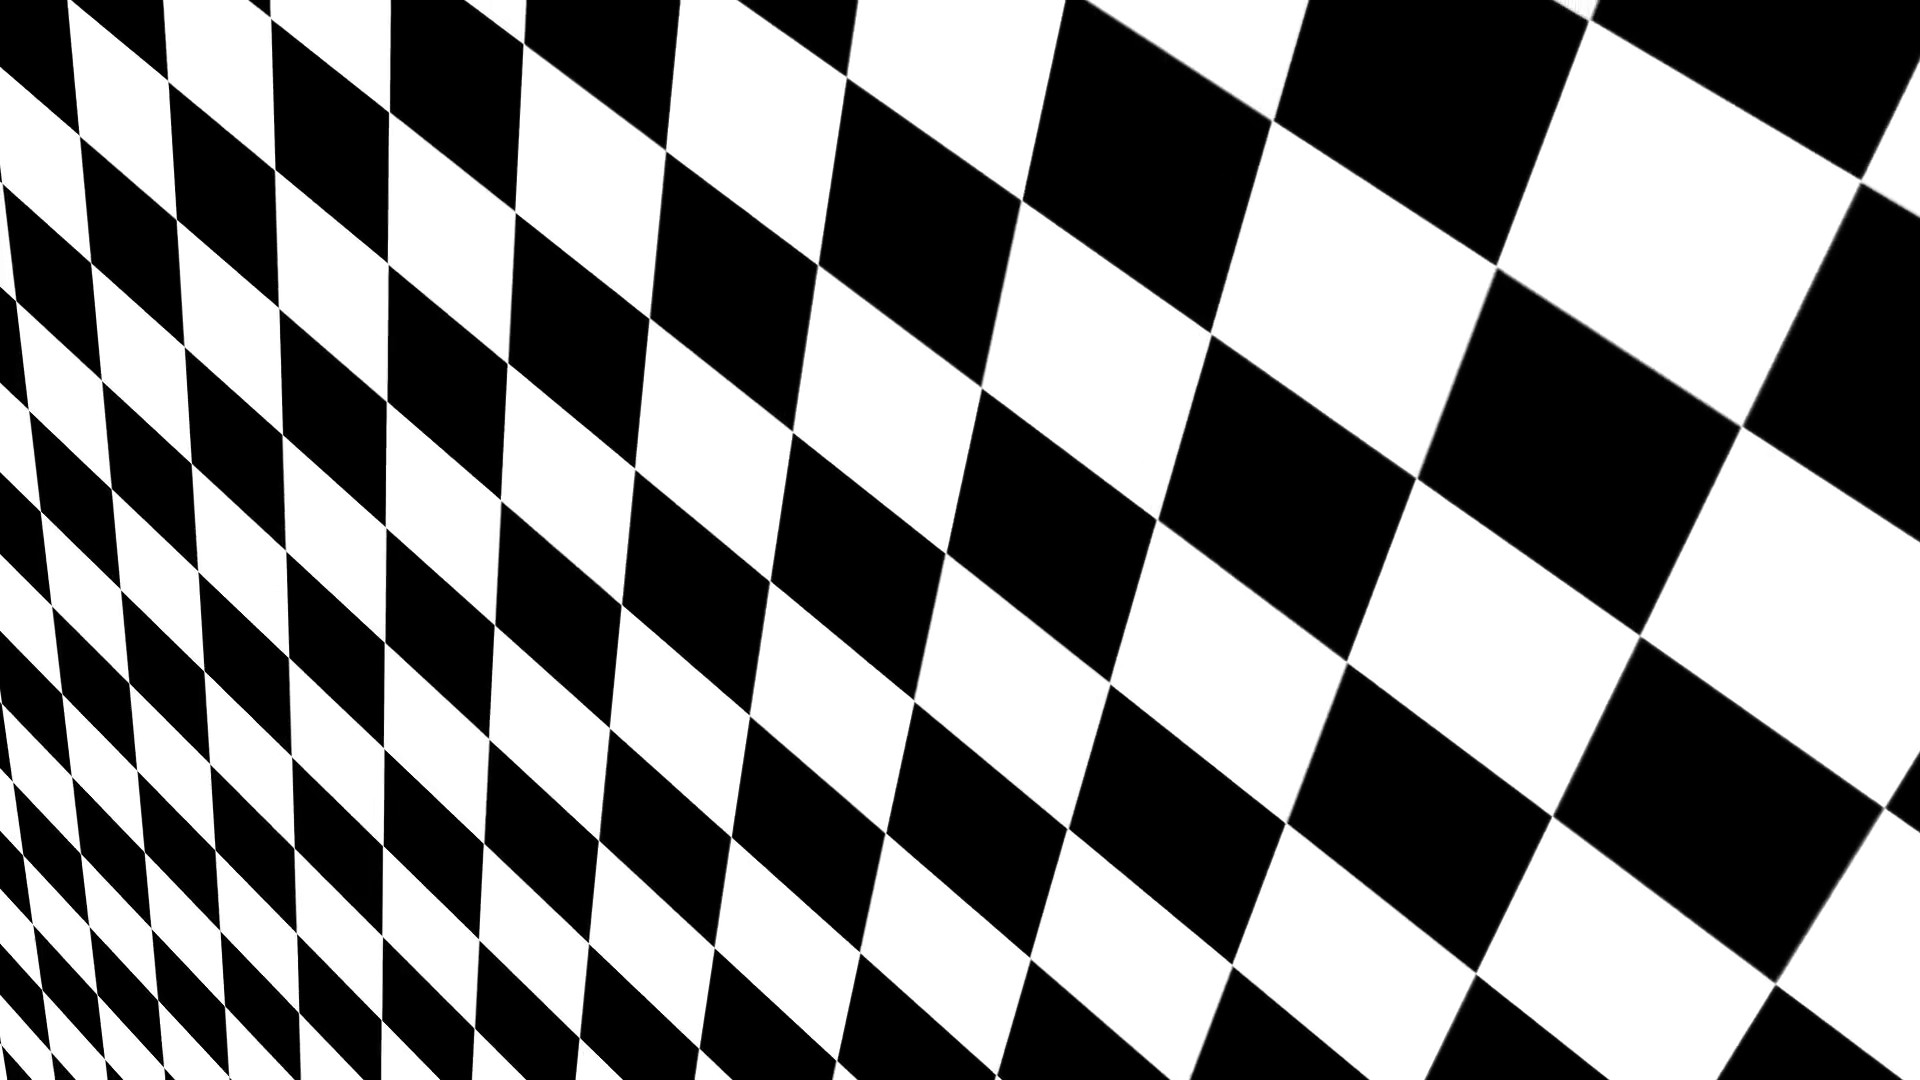 1920x1080 Checkered black and white Motion Background made in 3d software